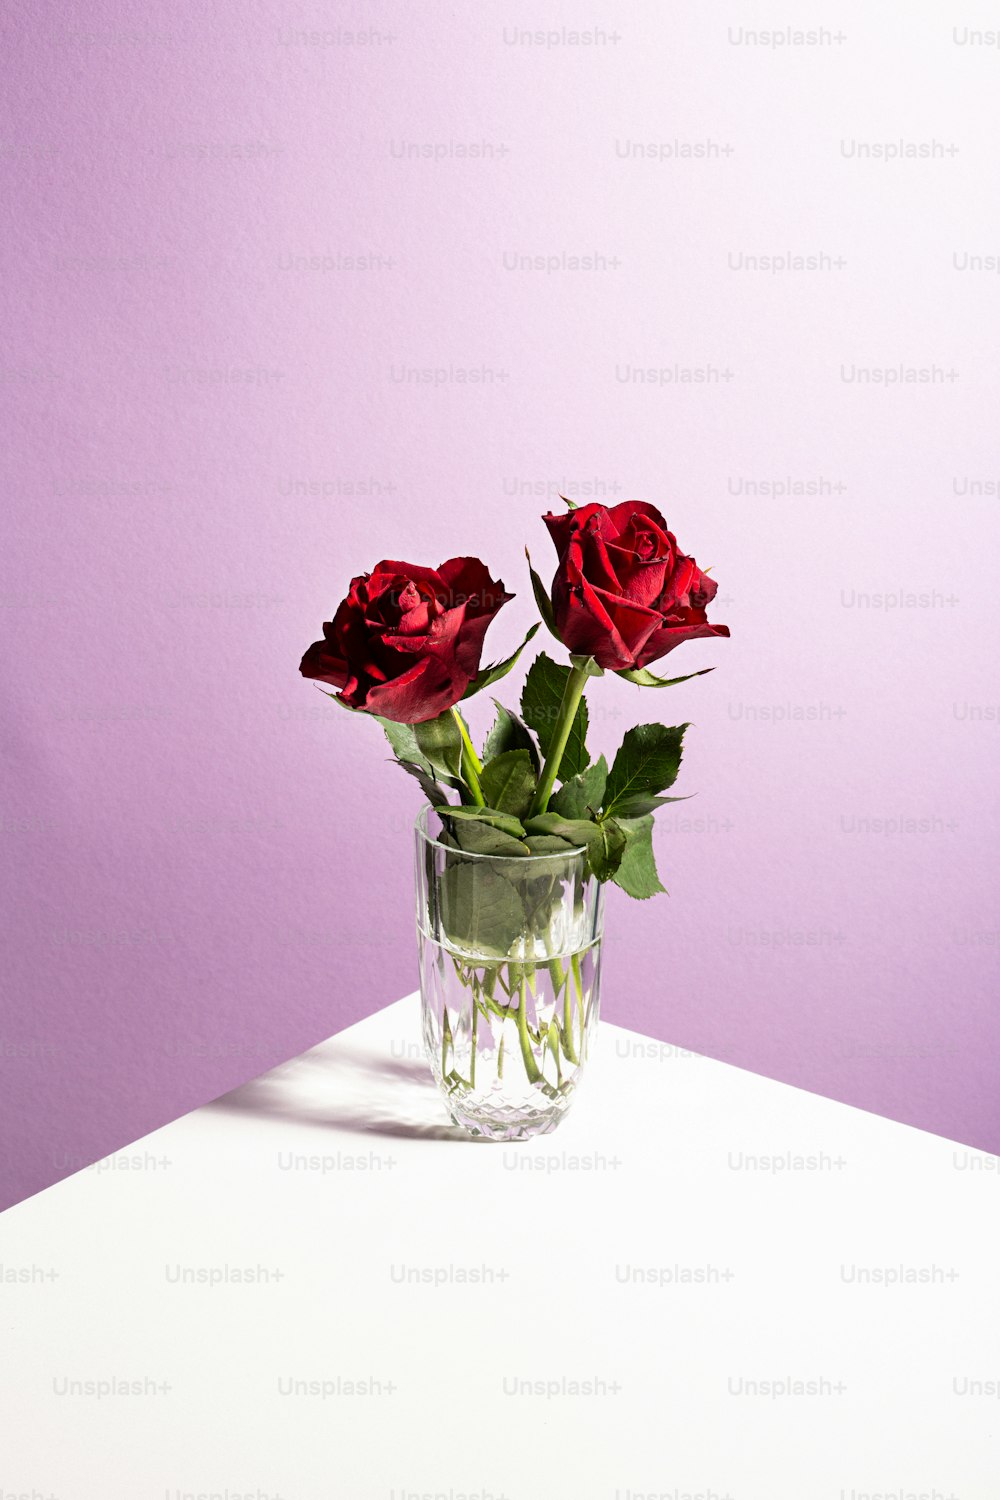 Two Red Roses In A Glass Vase On